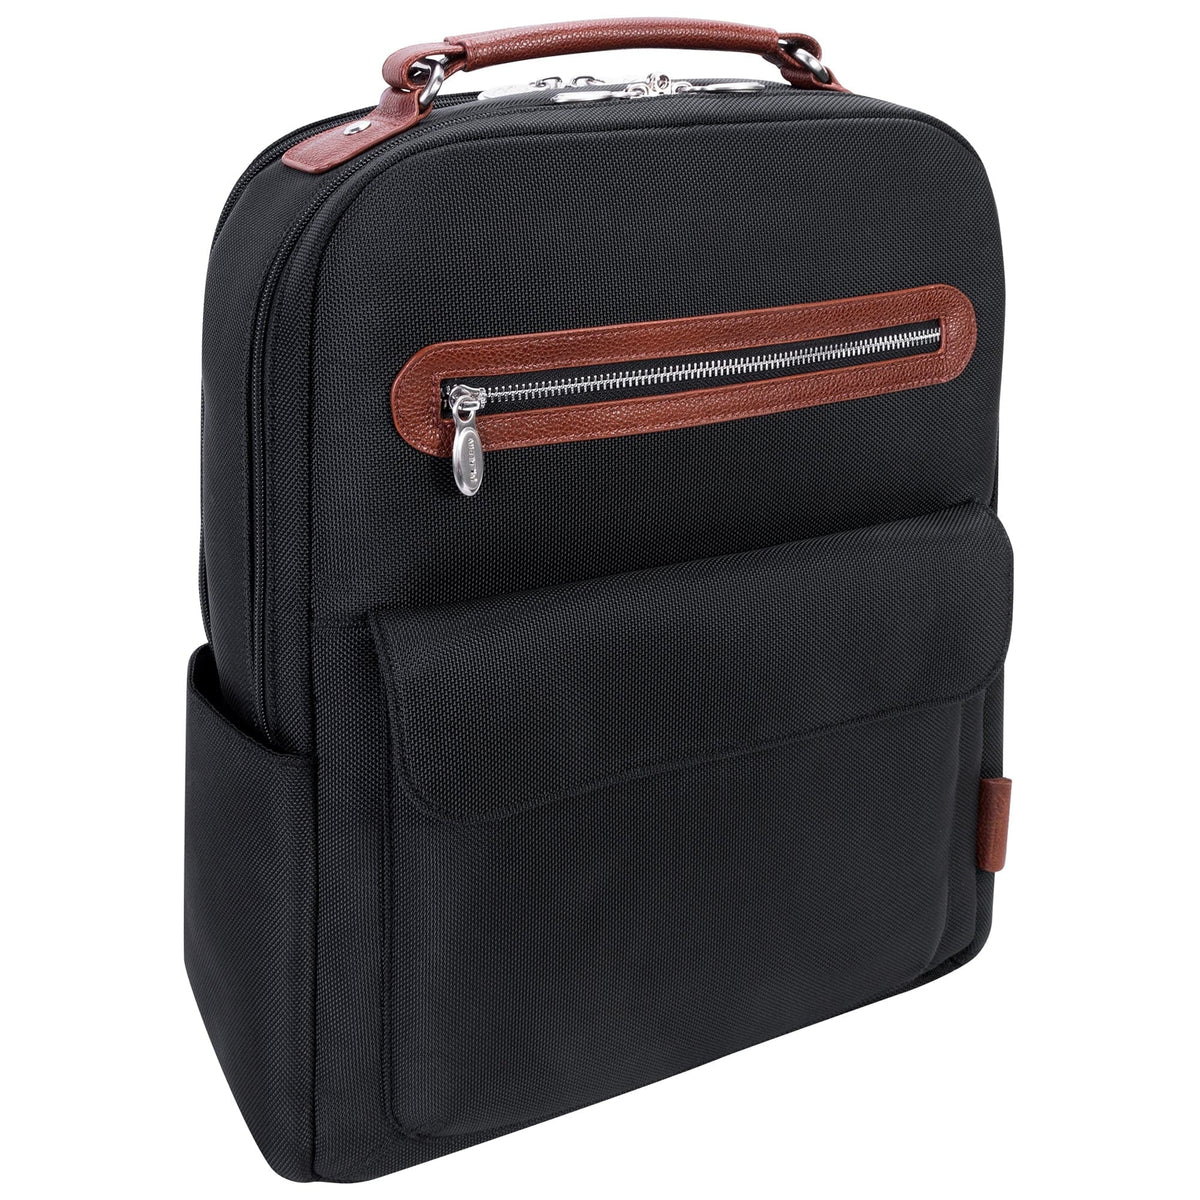 McKlein U Series Logan 17" Two-Tone Dual-Compartment Laptop and Tablet Nylon Backpack